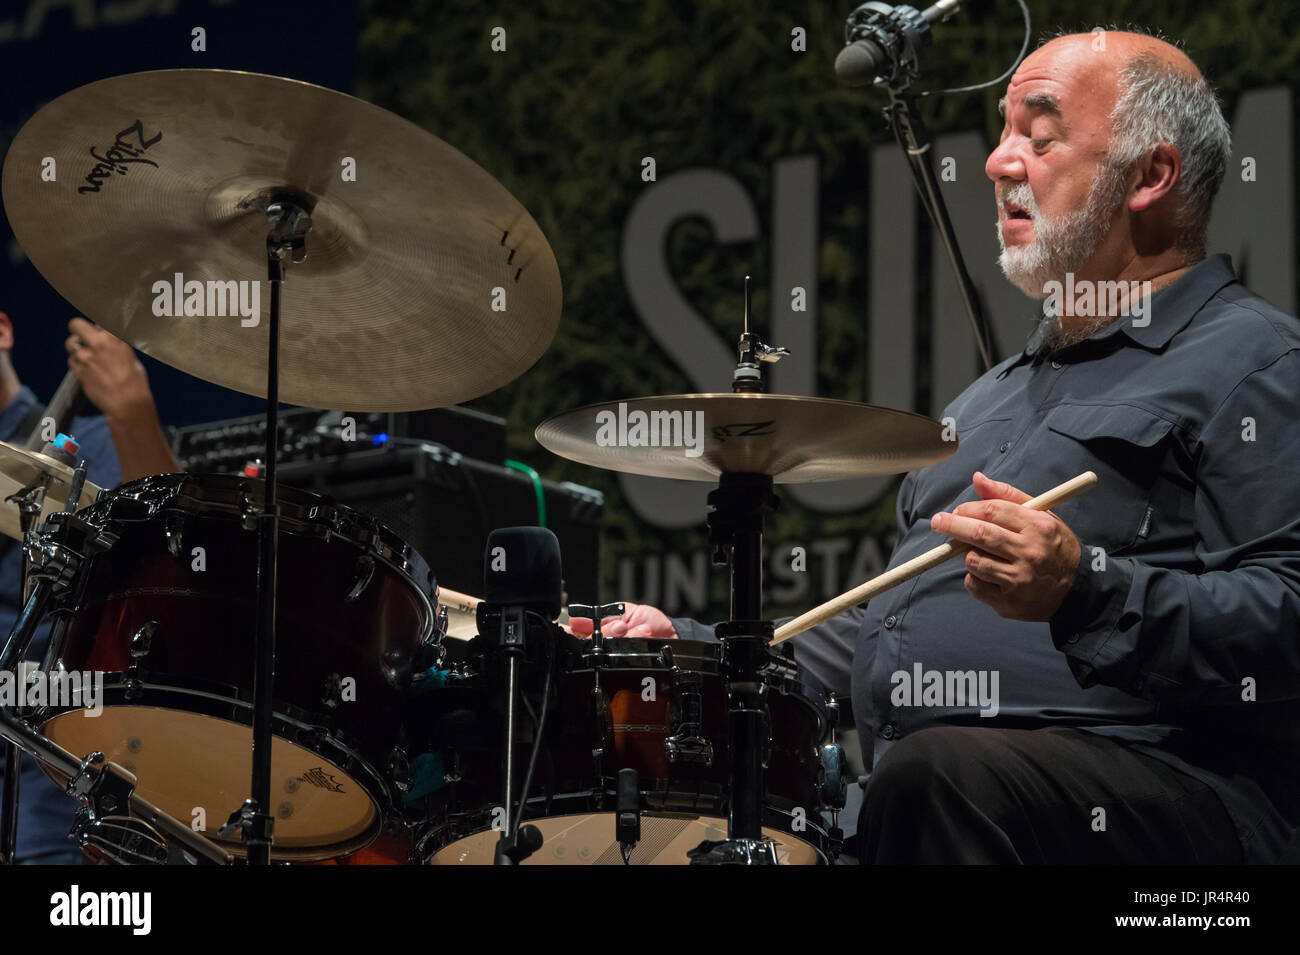 Rome, Italy. 01st Aug, 2017. Peter Erskine is a world jazz icon. His myth begins with the Weather Reports with Jaco Pastorius and Joe Zawinul. As a leader he also writes beautiful music pages with his European trio together with John Taylor and Palle Danielsson. On 1/8/2017 he performed in Rome at 'Summertime 2017' event presenting his latest record: 'Dr. UM '. With him on stage Iohn Beasley on piano, Bob Sheppard on tenor and soprano sax and Benjamin Shepherd on mass. Peter Erskine Credit: Leo Claudio De Petris/Pacific Press/Alamy Live News Stock Photo